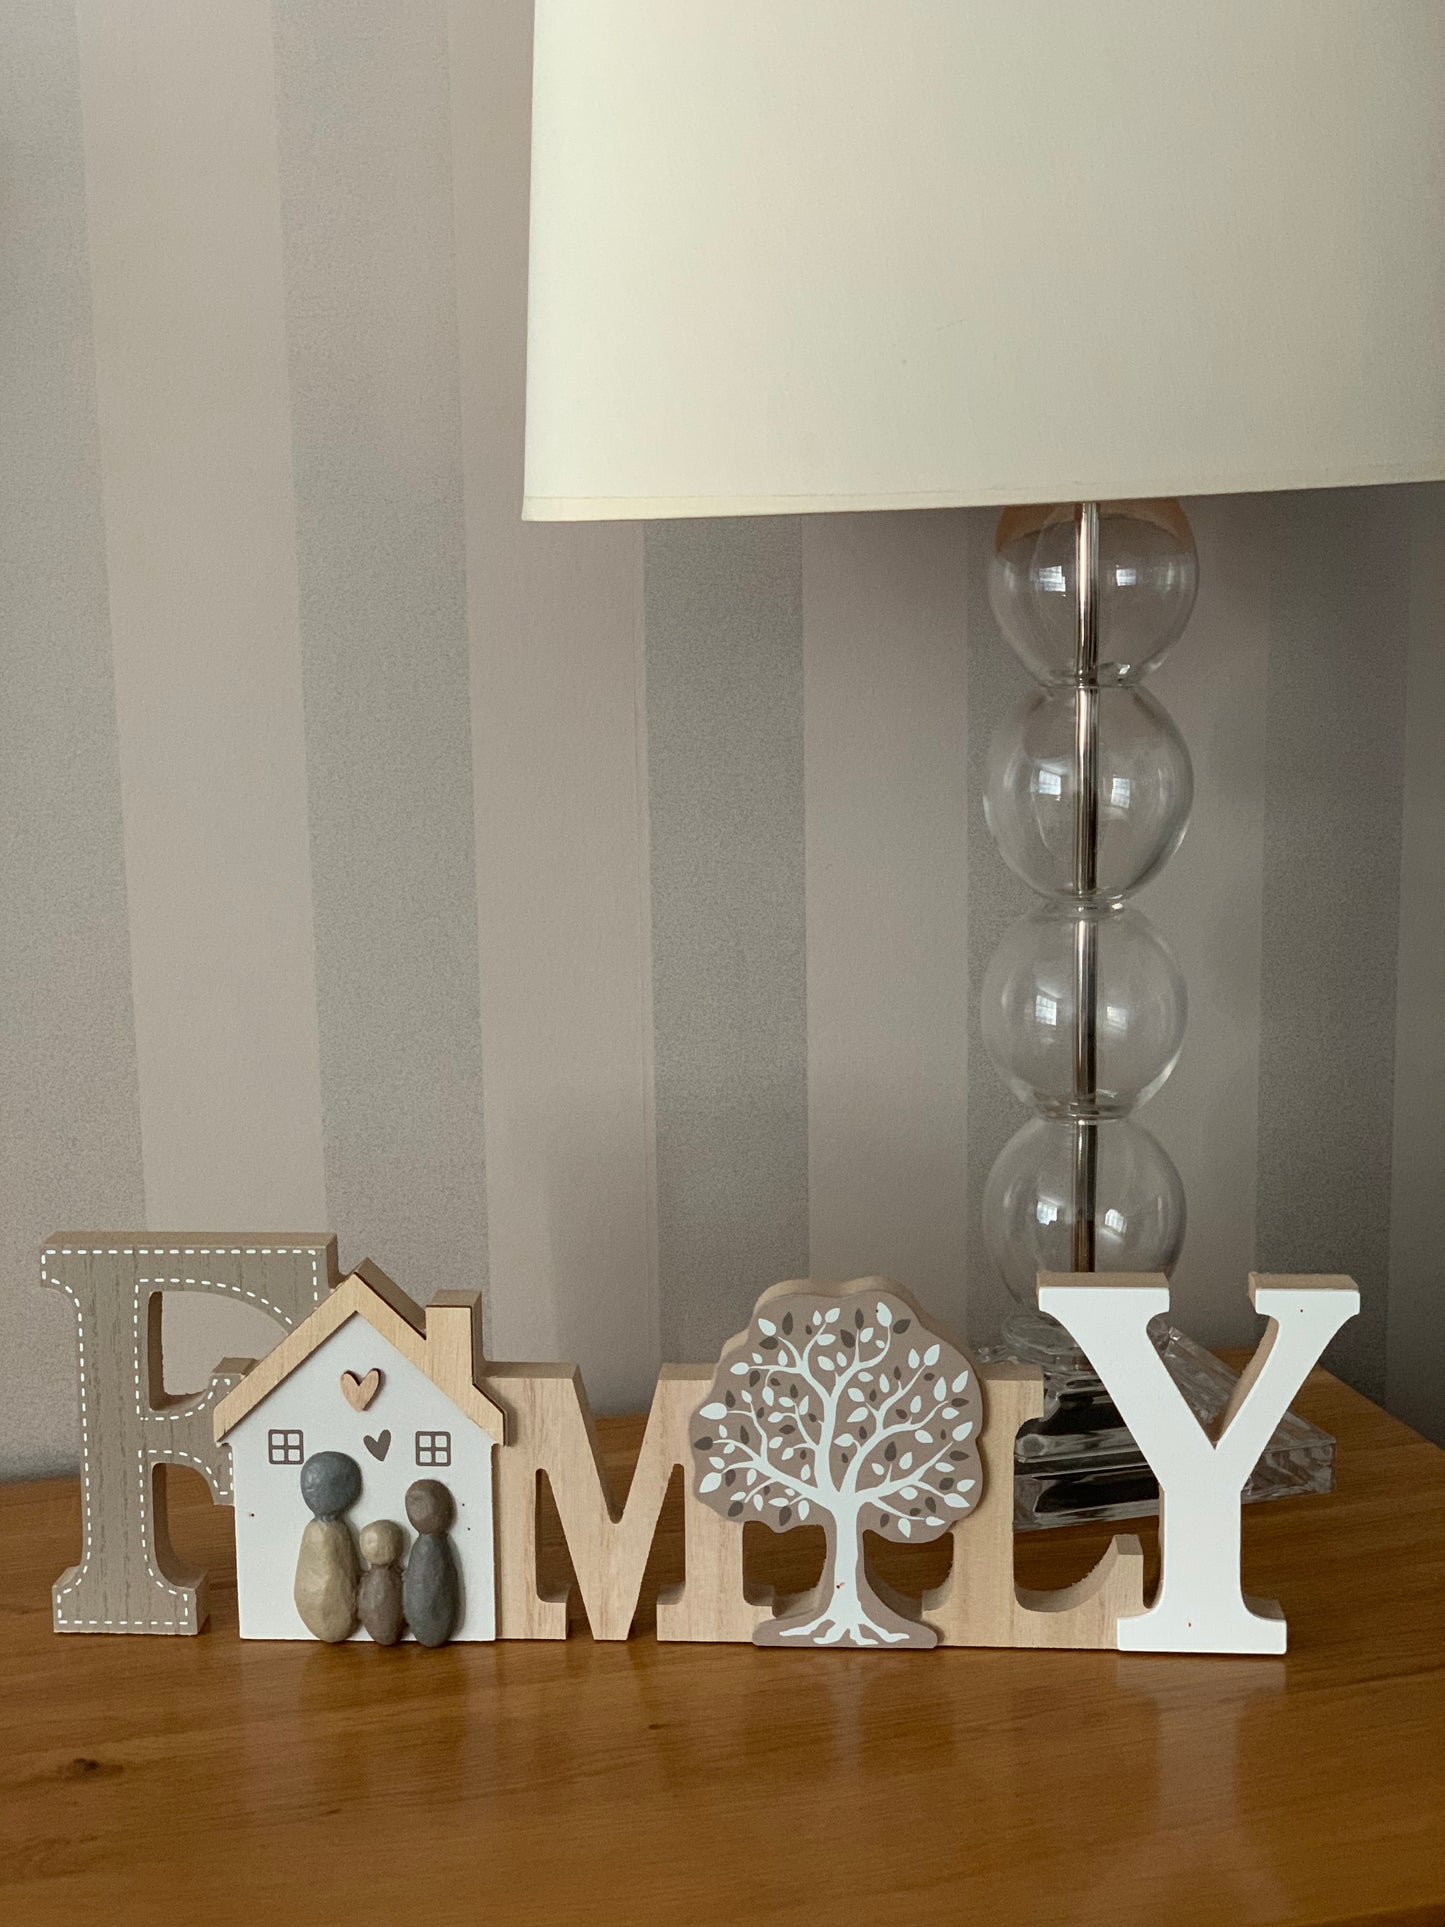 Love & Affection Word Family Plaque